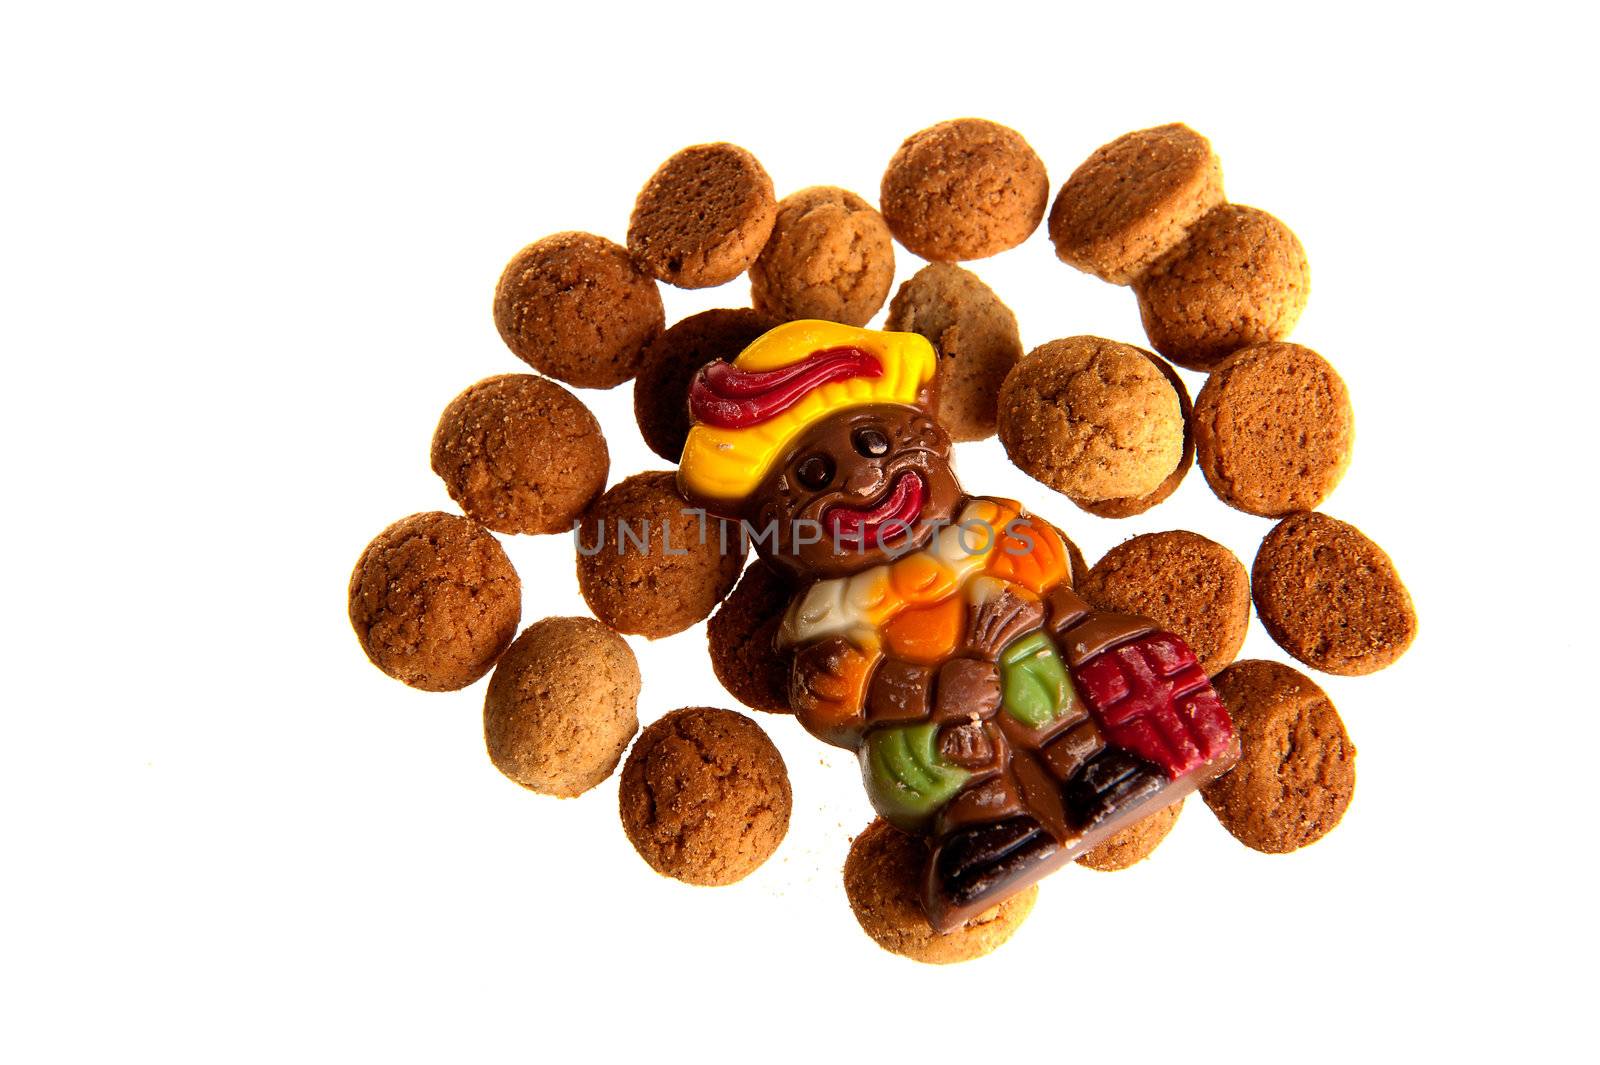 Sweet candy -gingernuts- and a chocolate 'piet' for a dutch holiday called 'sinterklaas'